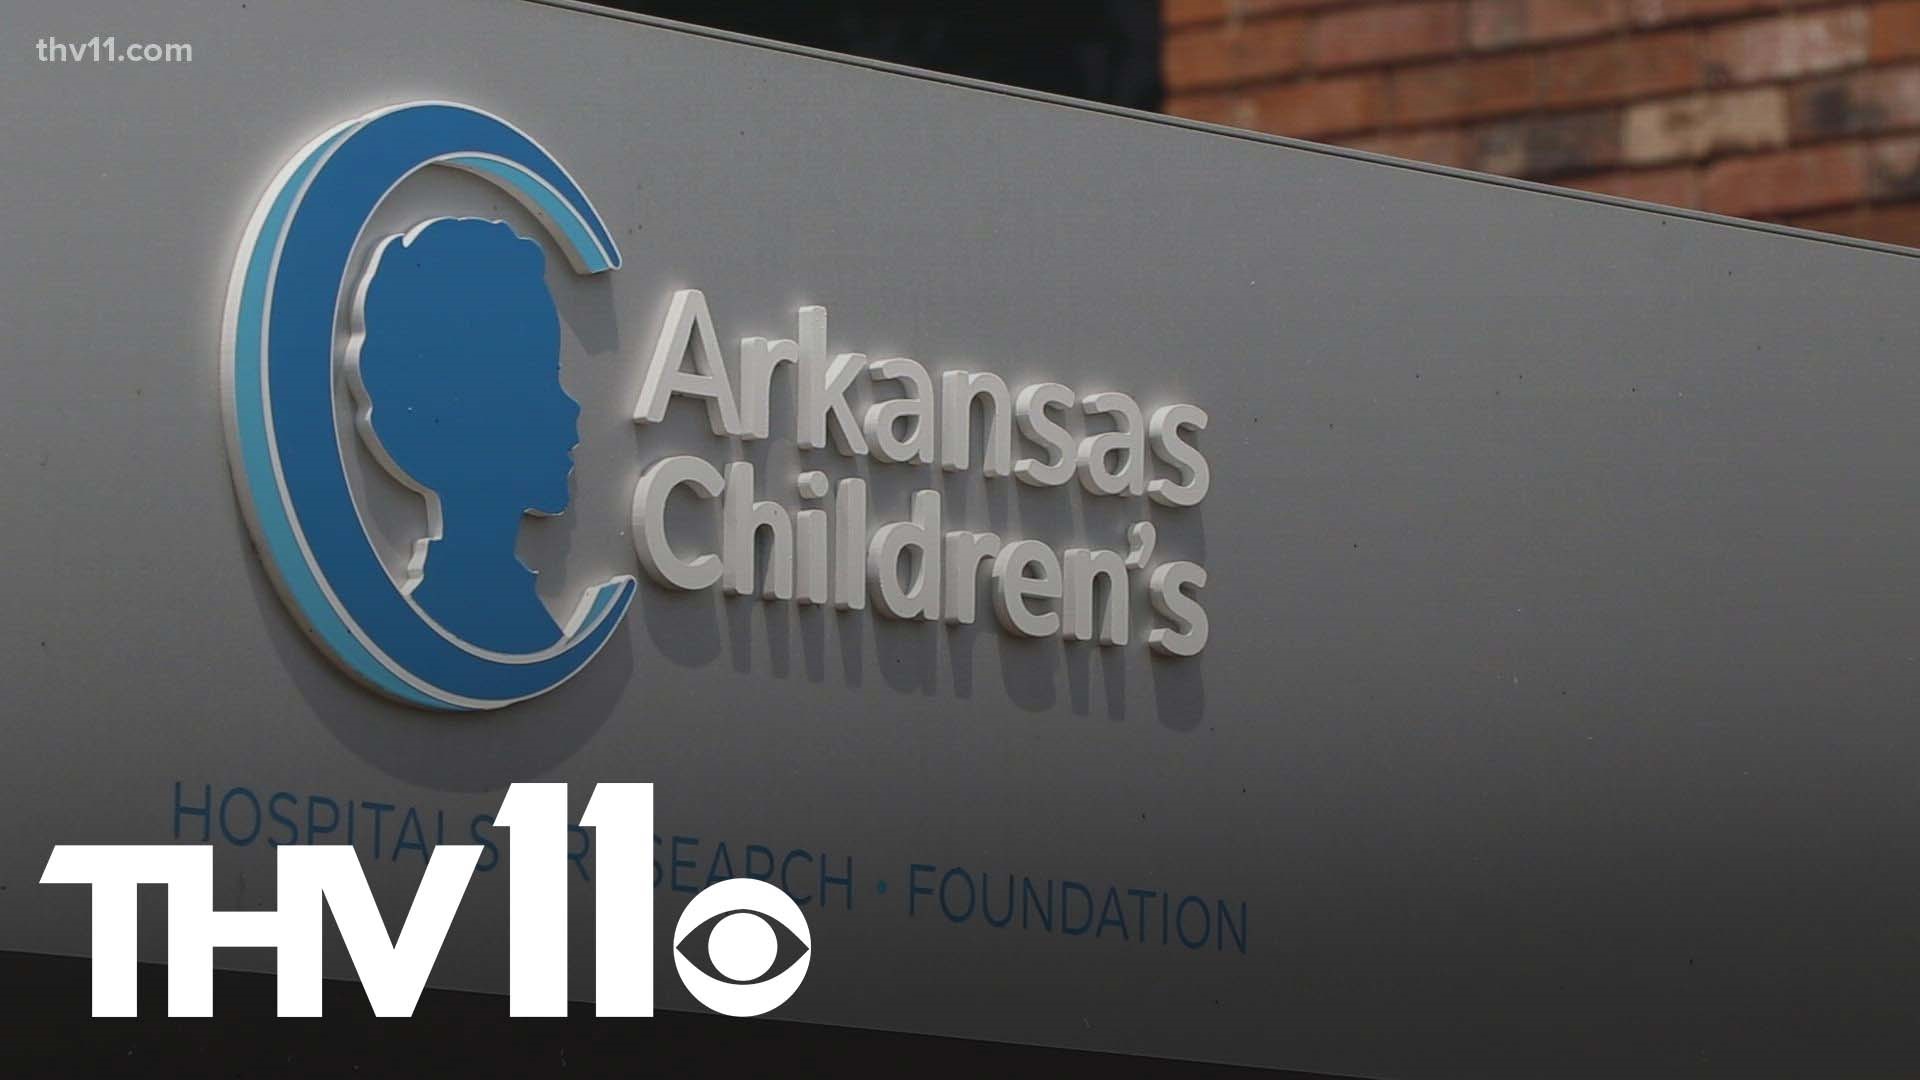 As Arkansas continues to see record breaking numbers of COVID-19 cases, the virus is starting have a big impact on children in the state.